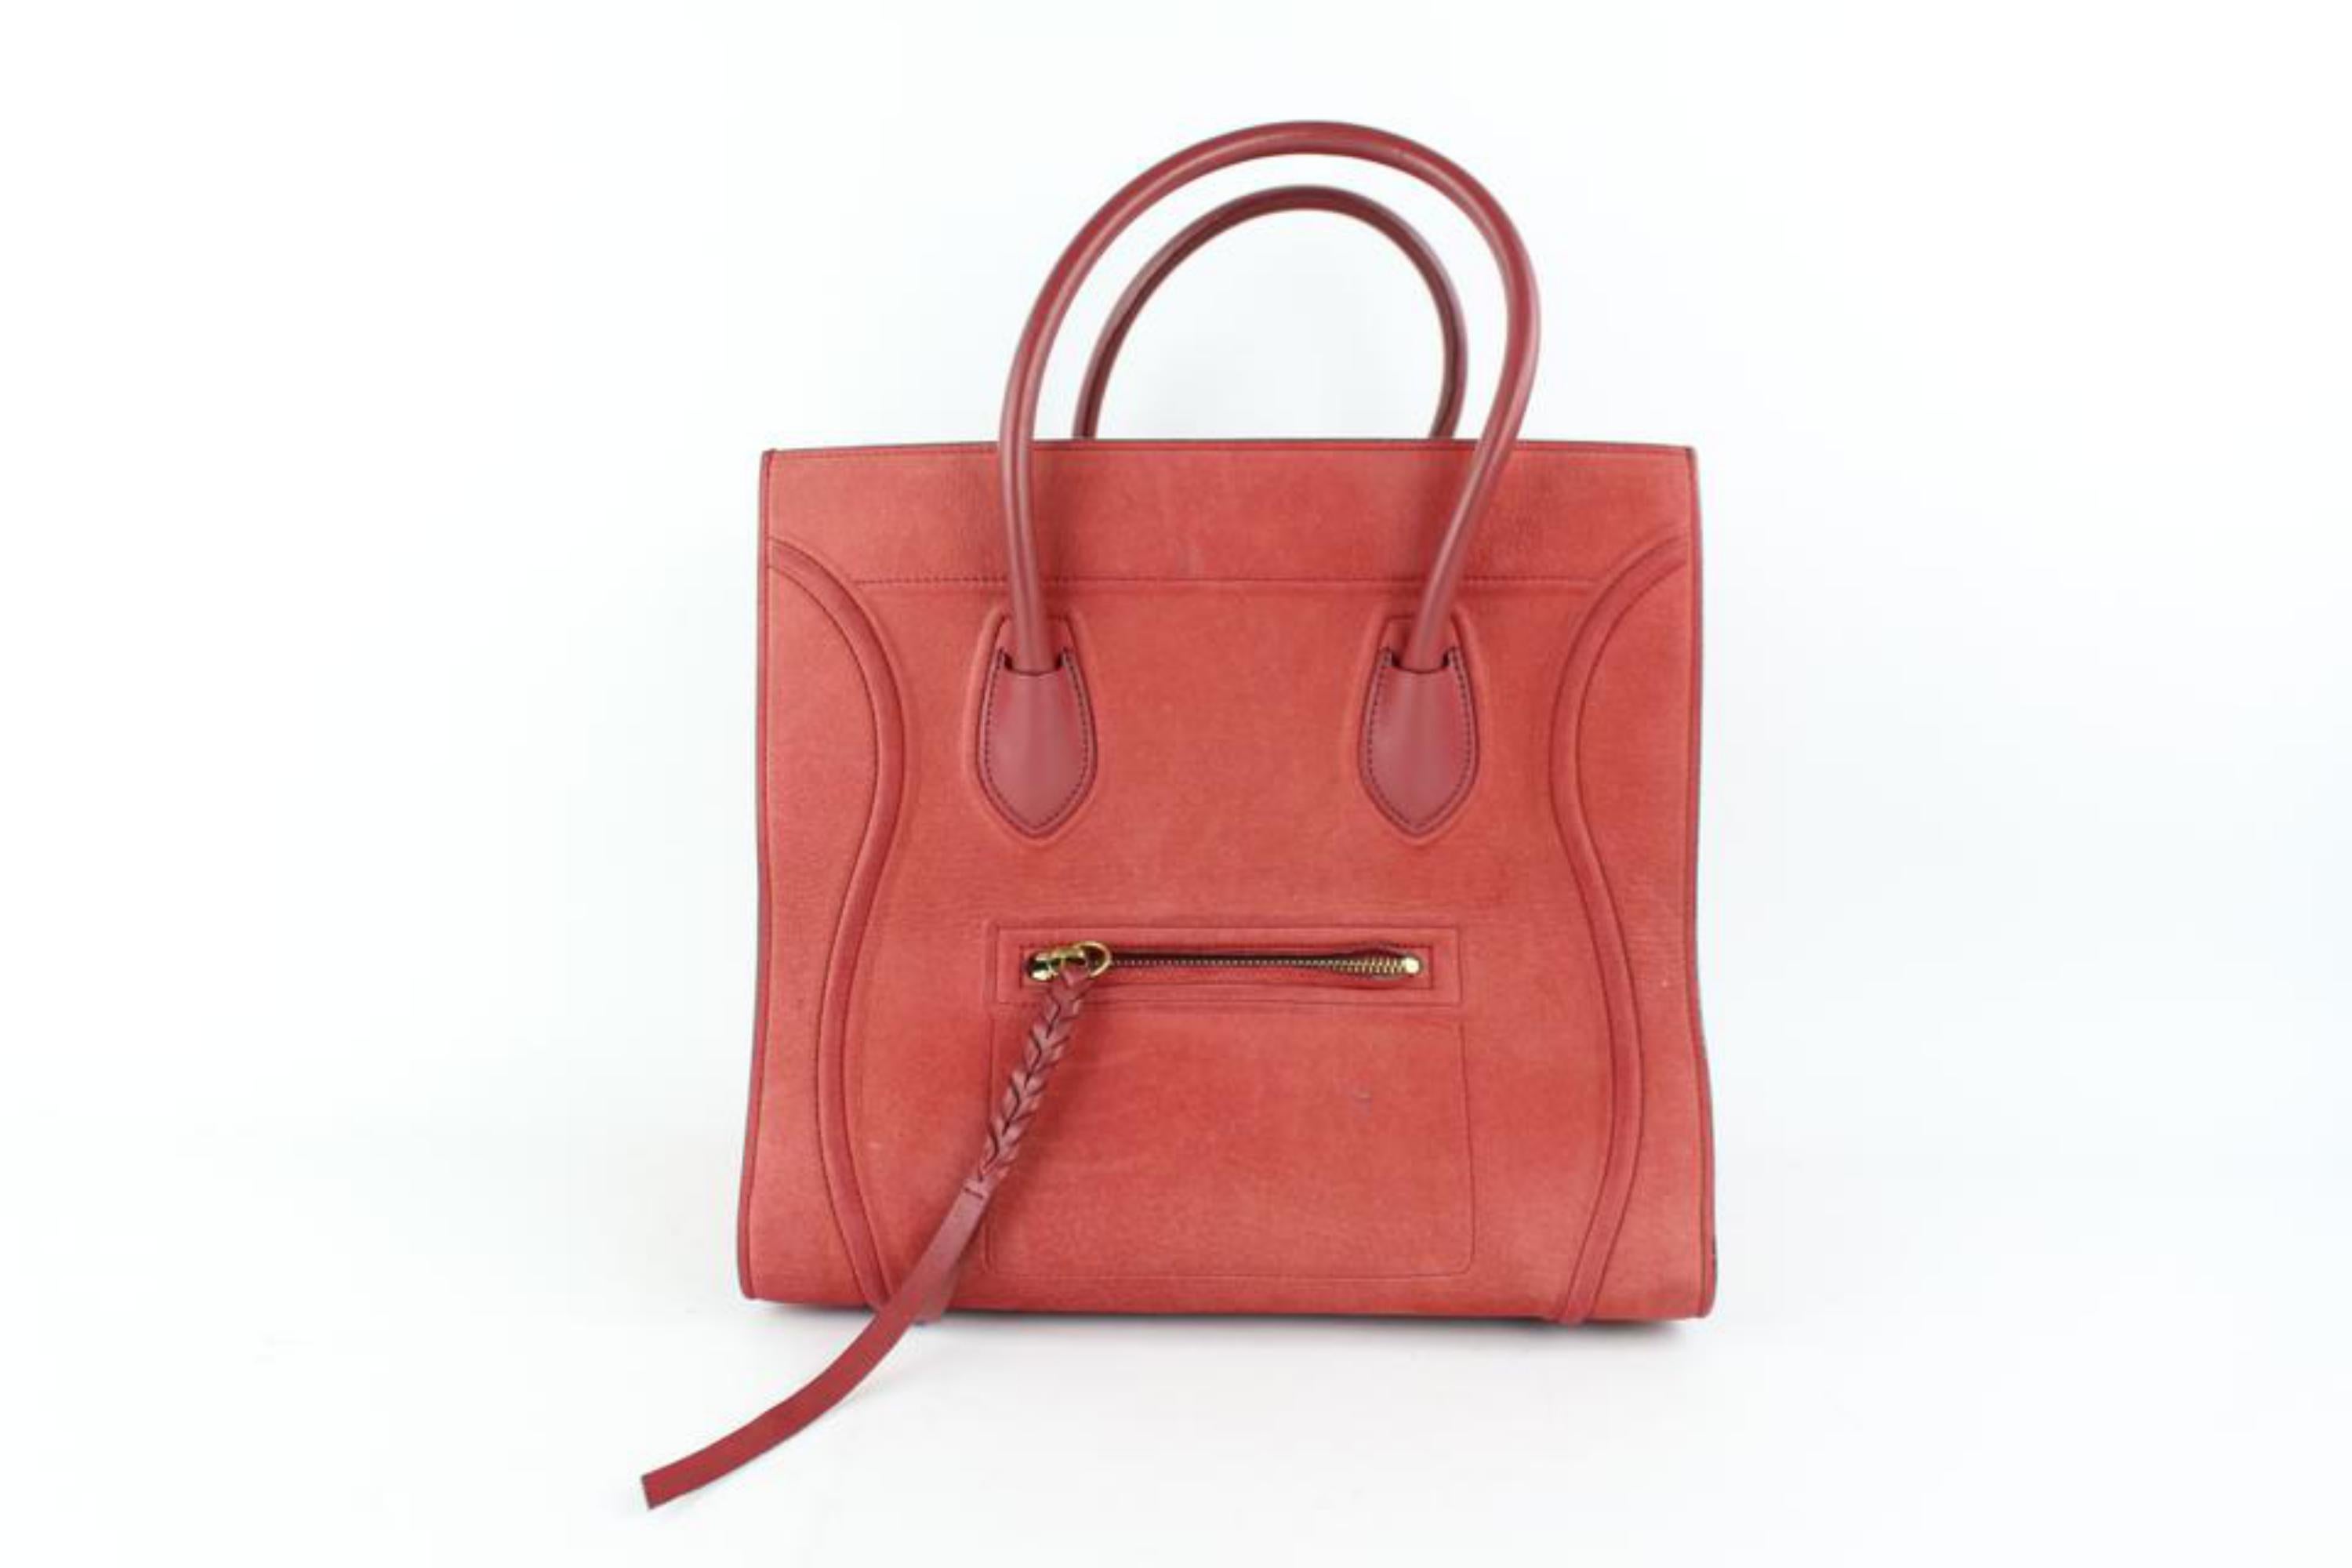 Céline Cabas Phantom Luggage Dark 16cez0129 Red Suede Leather Satchel In Good Condition For Sale In Forest Hills, NY